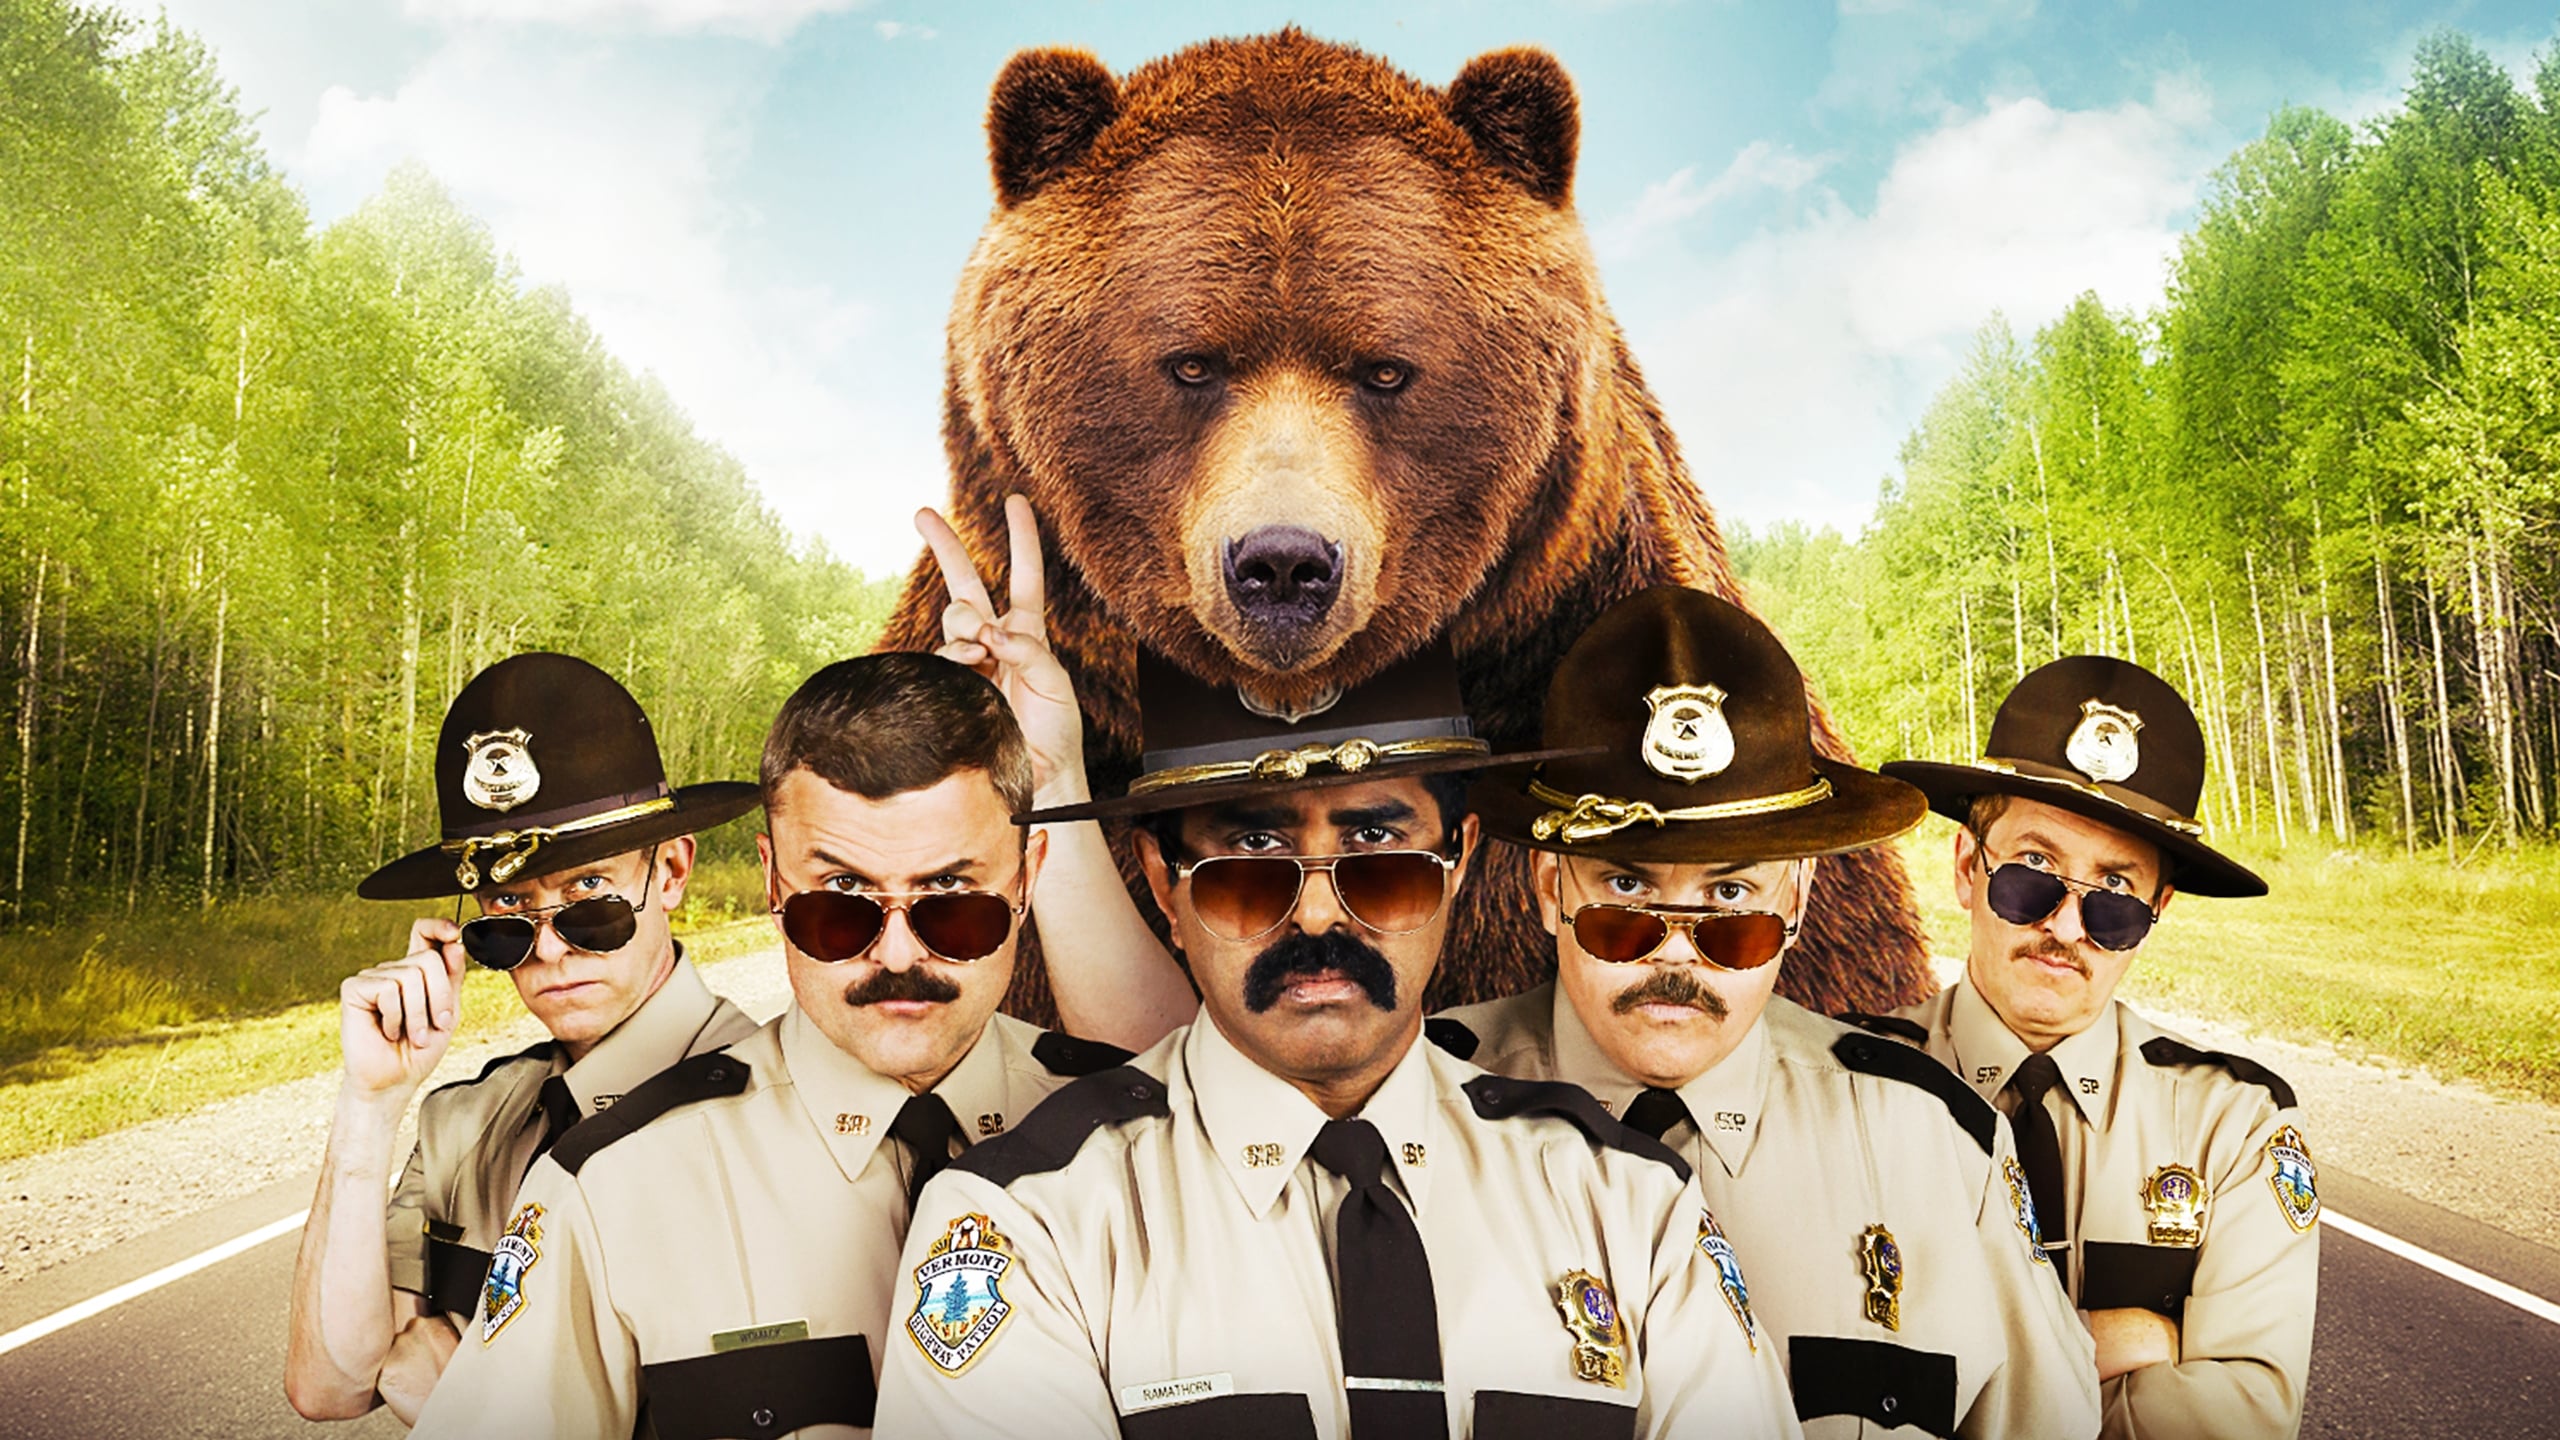 Super Troopers 2 Photos.